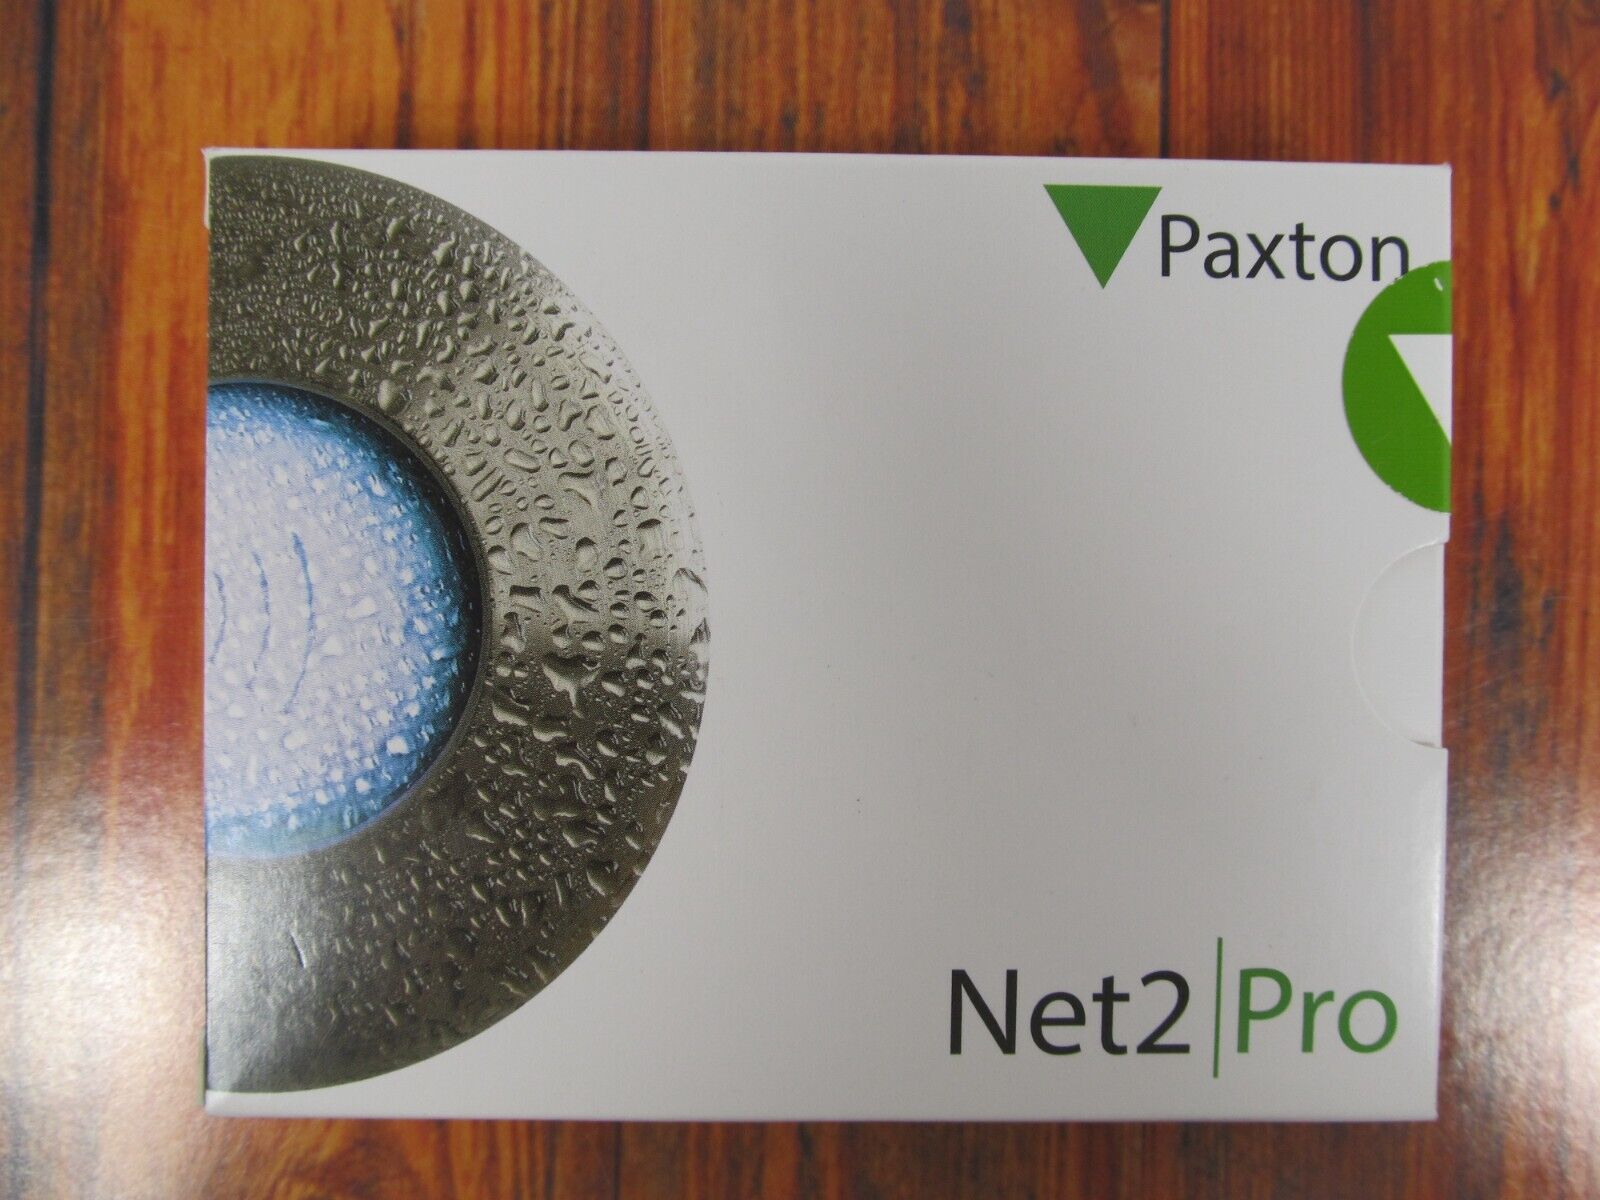 Paxton Access 930-010-US Net2 Pro Software on USB V6.01 New Sealed Charity